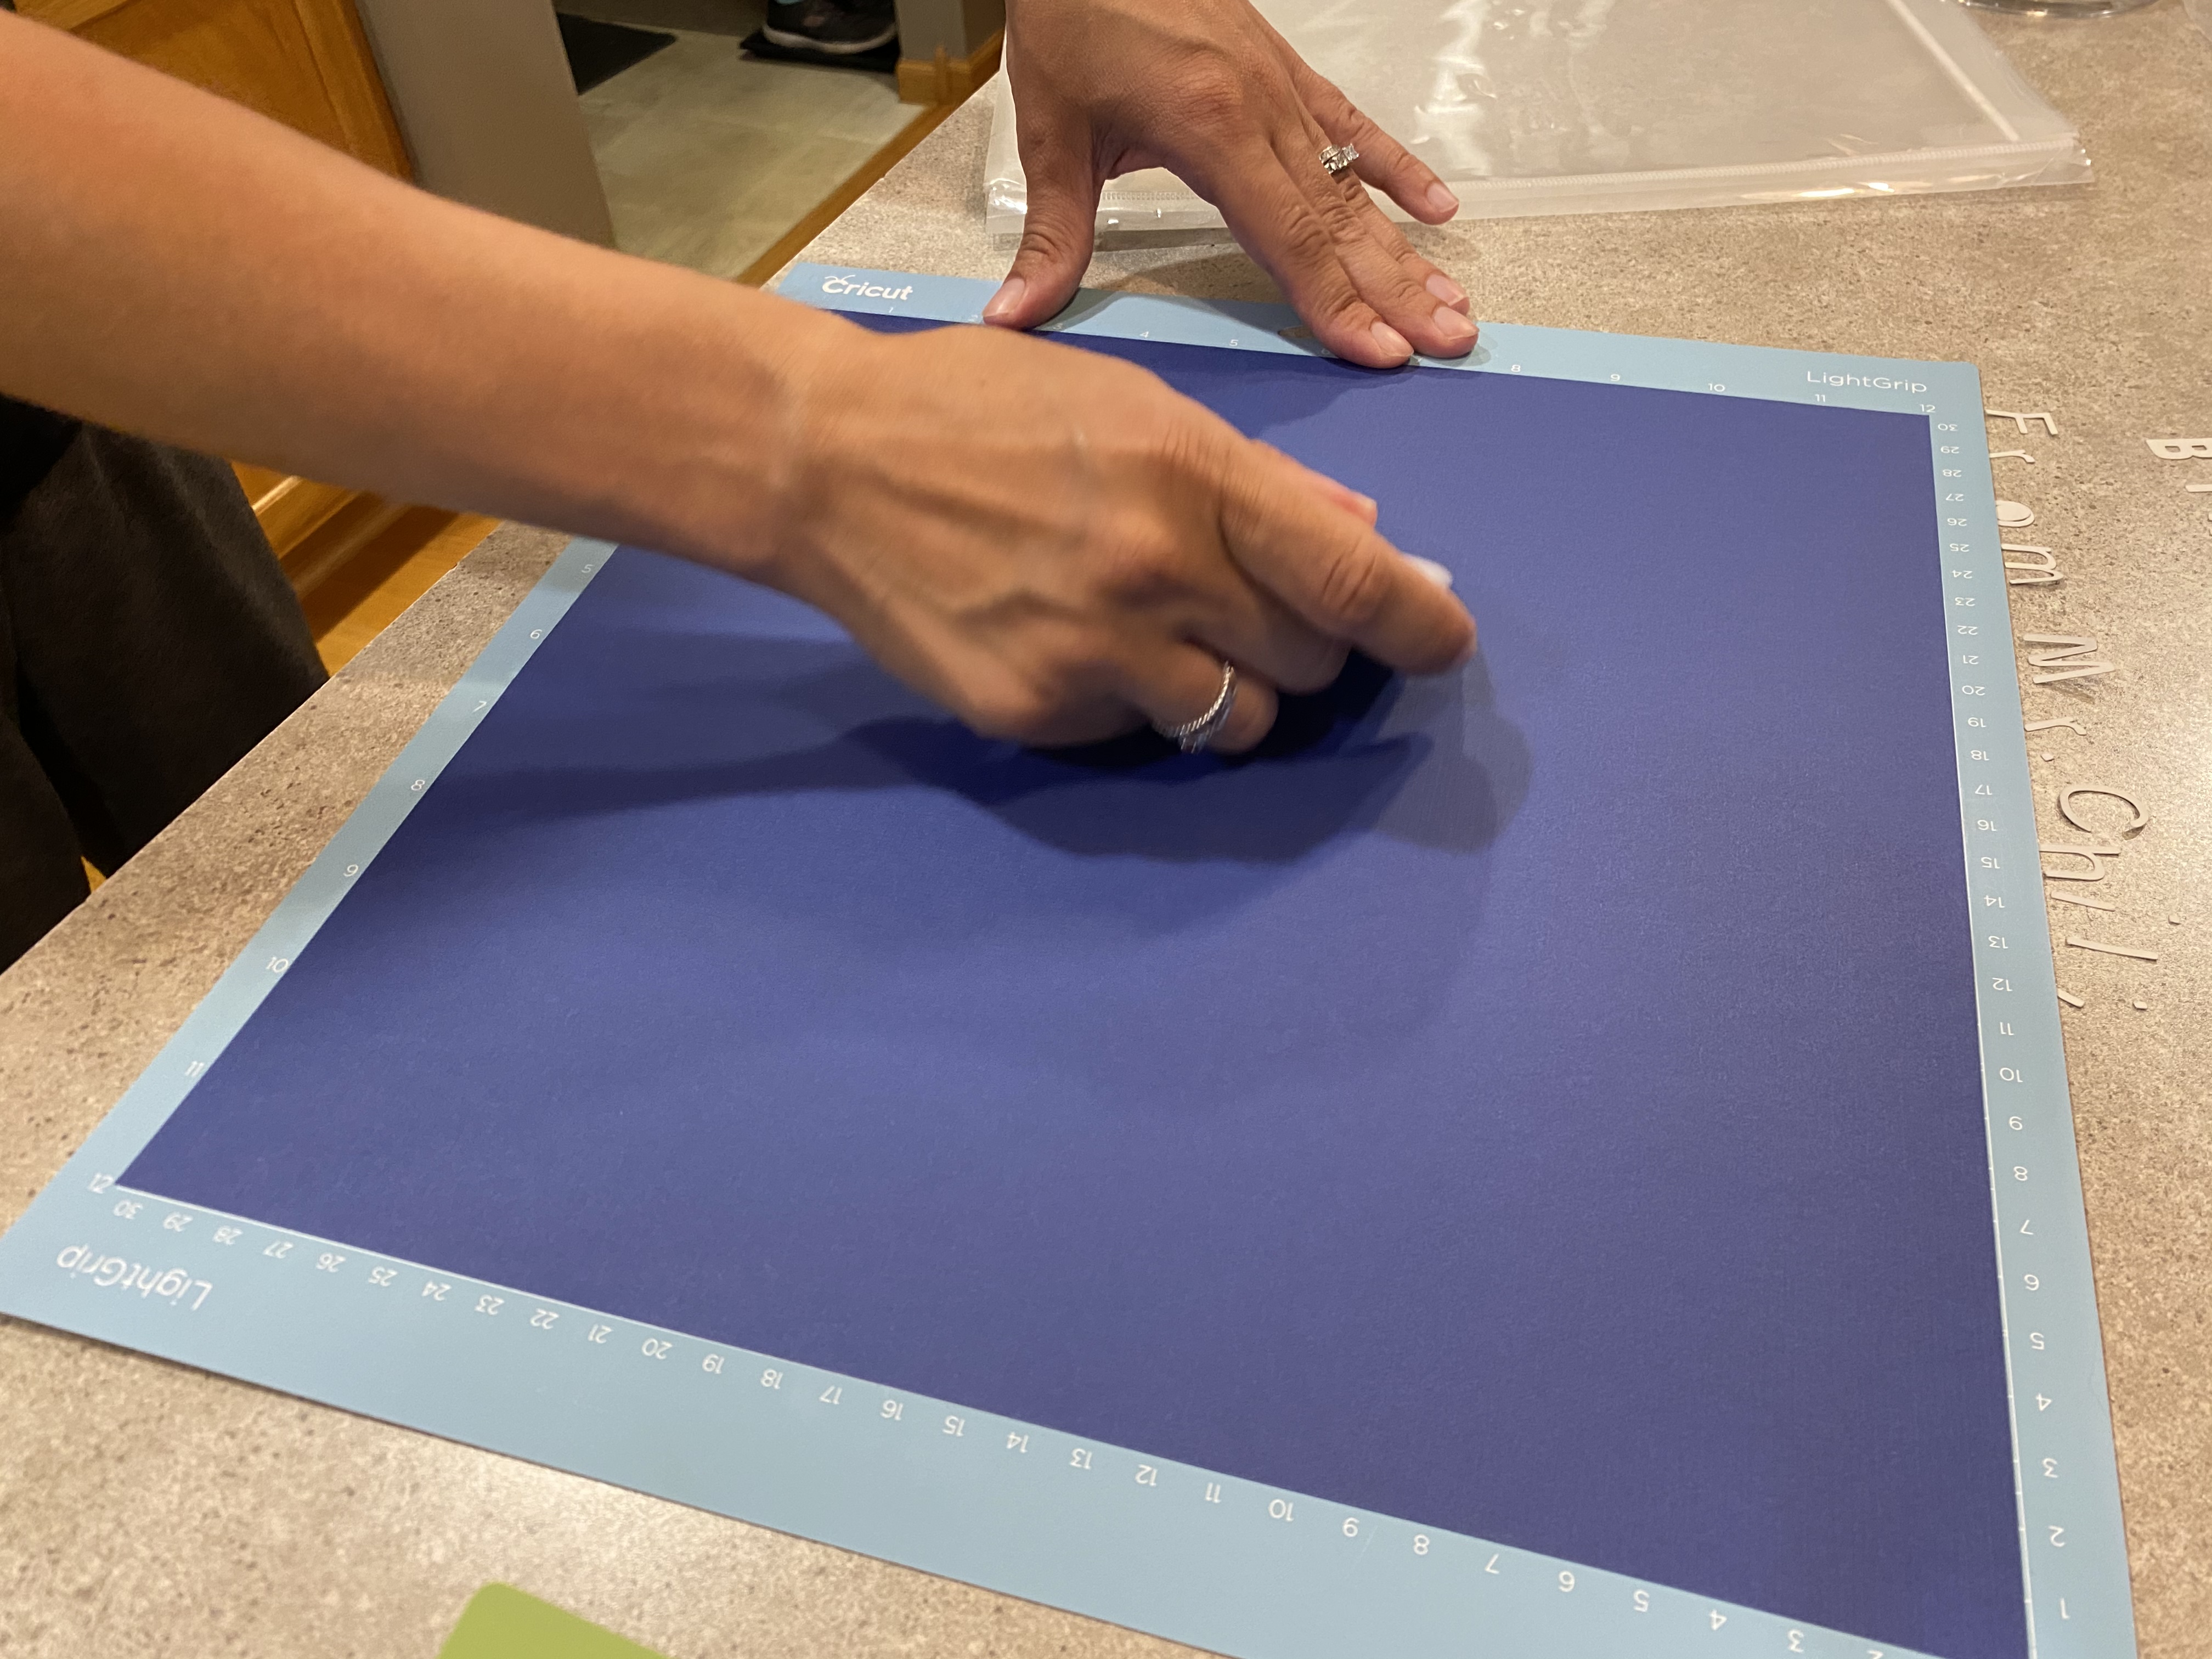 Using a scraper to adhere the cardstock to the Cricut mat